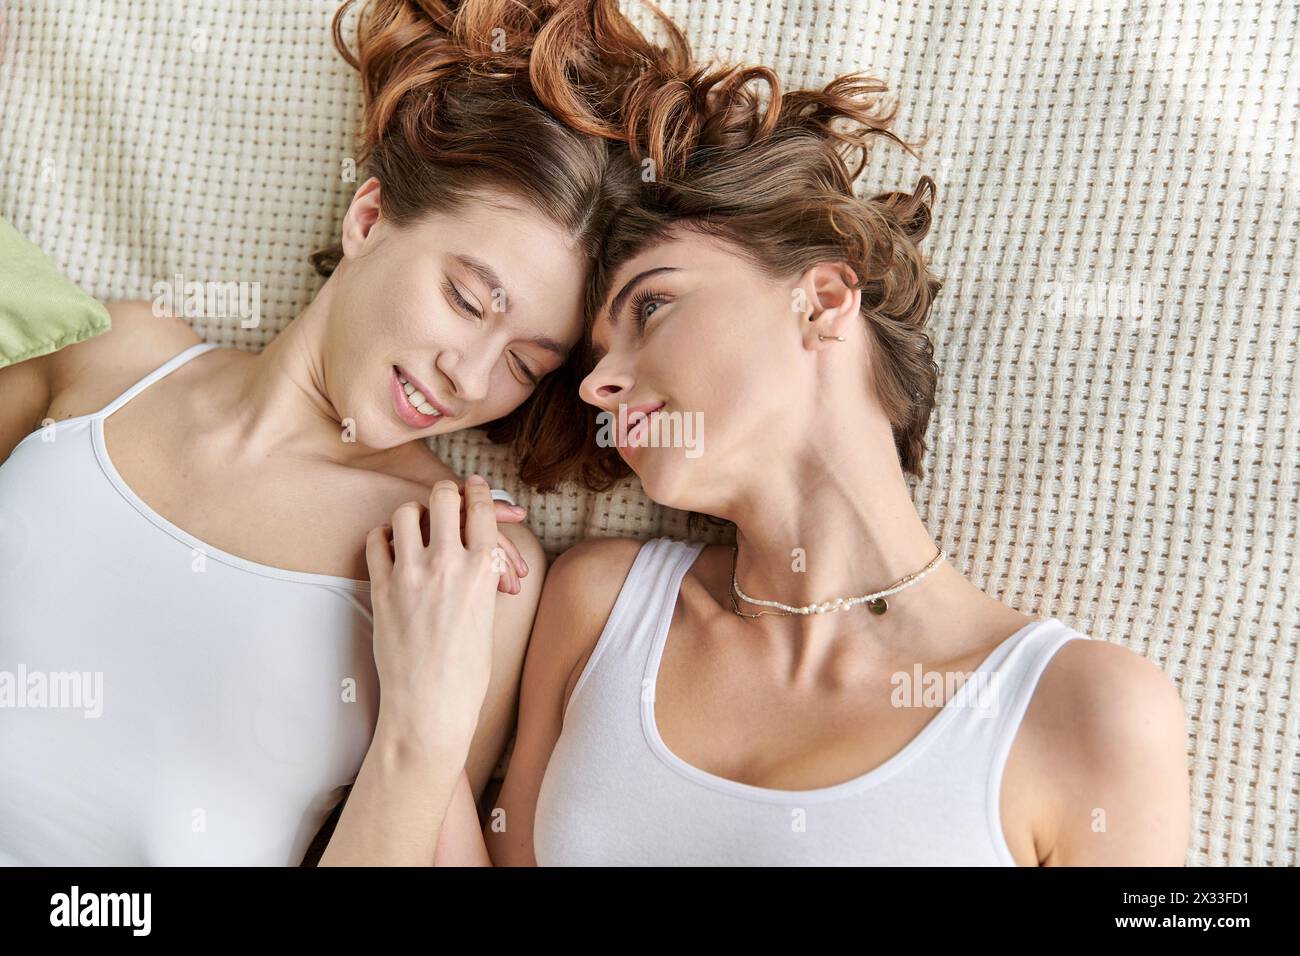 Two women in comfy attire lying next to each other on a bed. Stock Photo